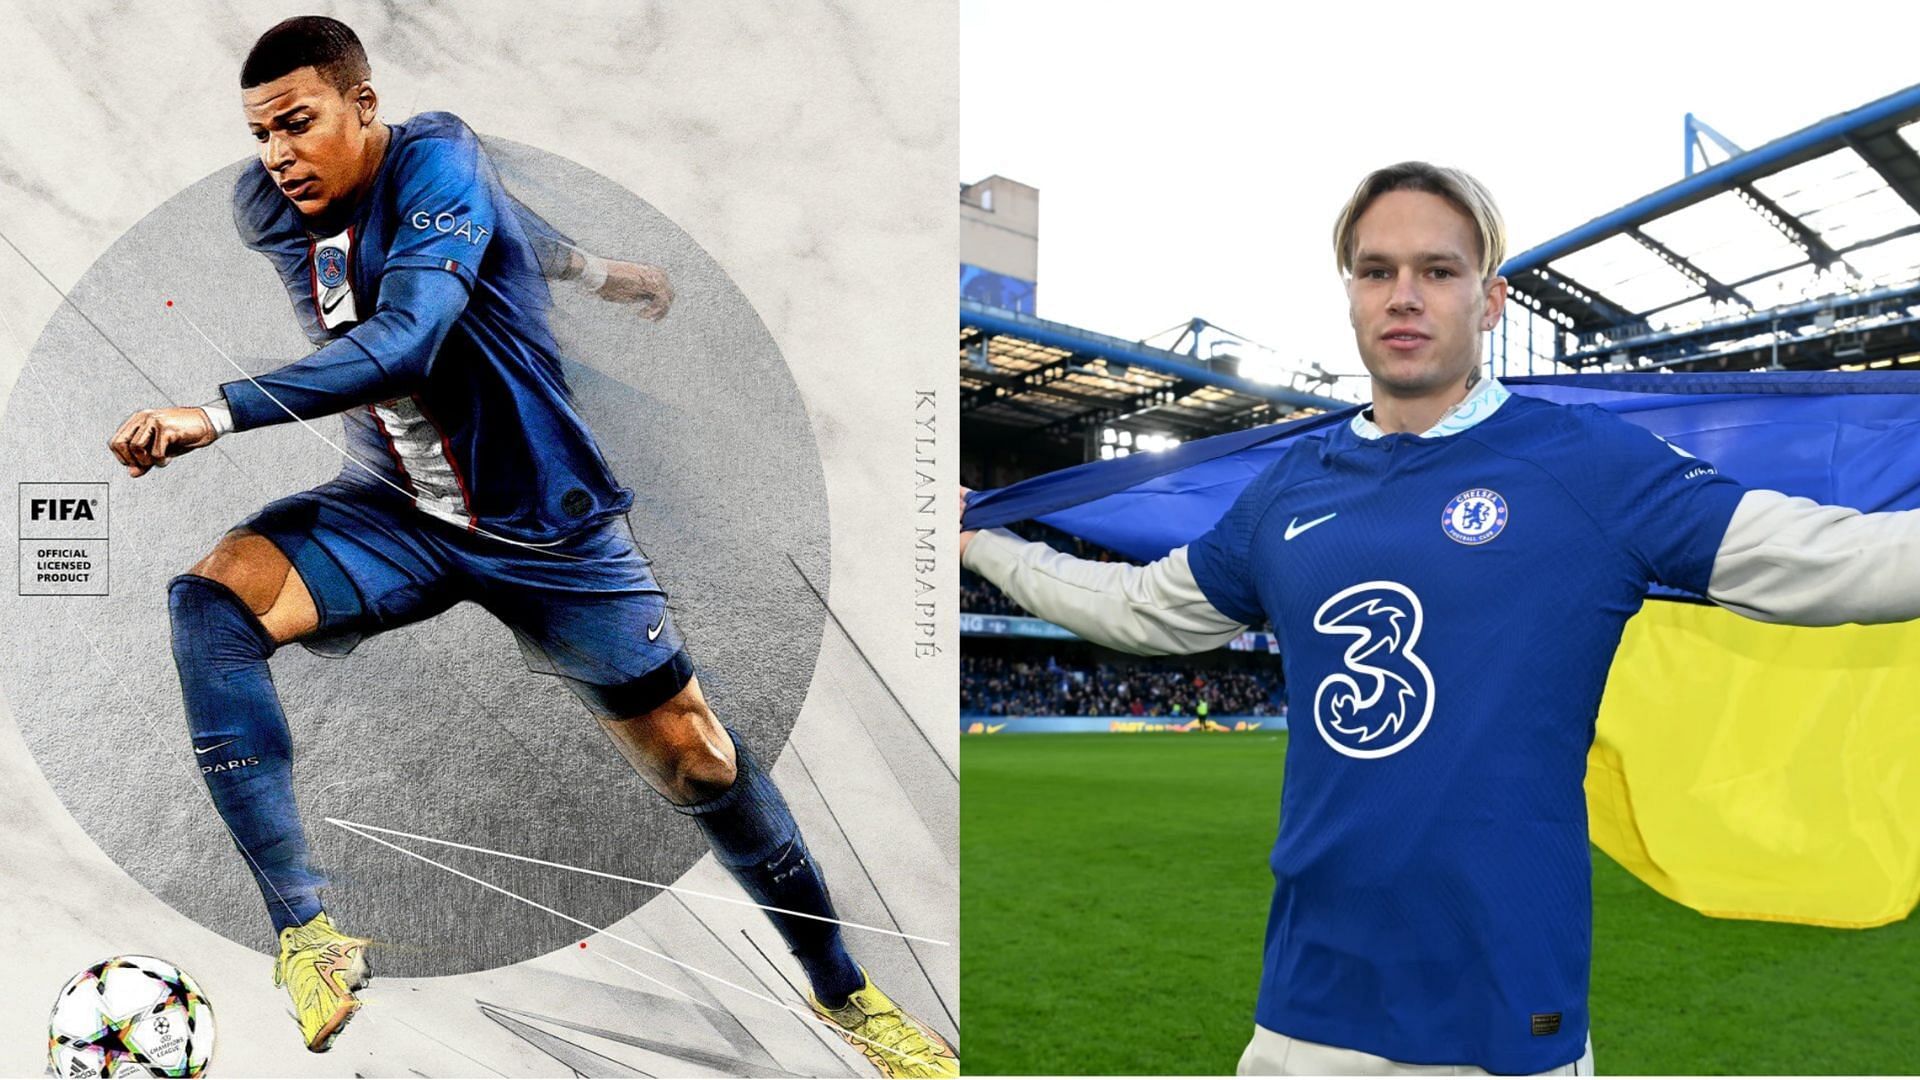 Mudryk could be an interesting choice to go with in career mode saves (Images via EA Sports, Chelsea)